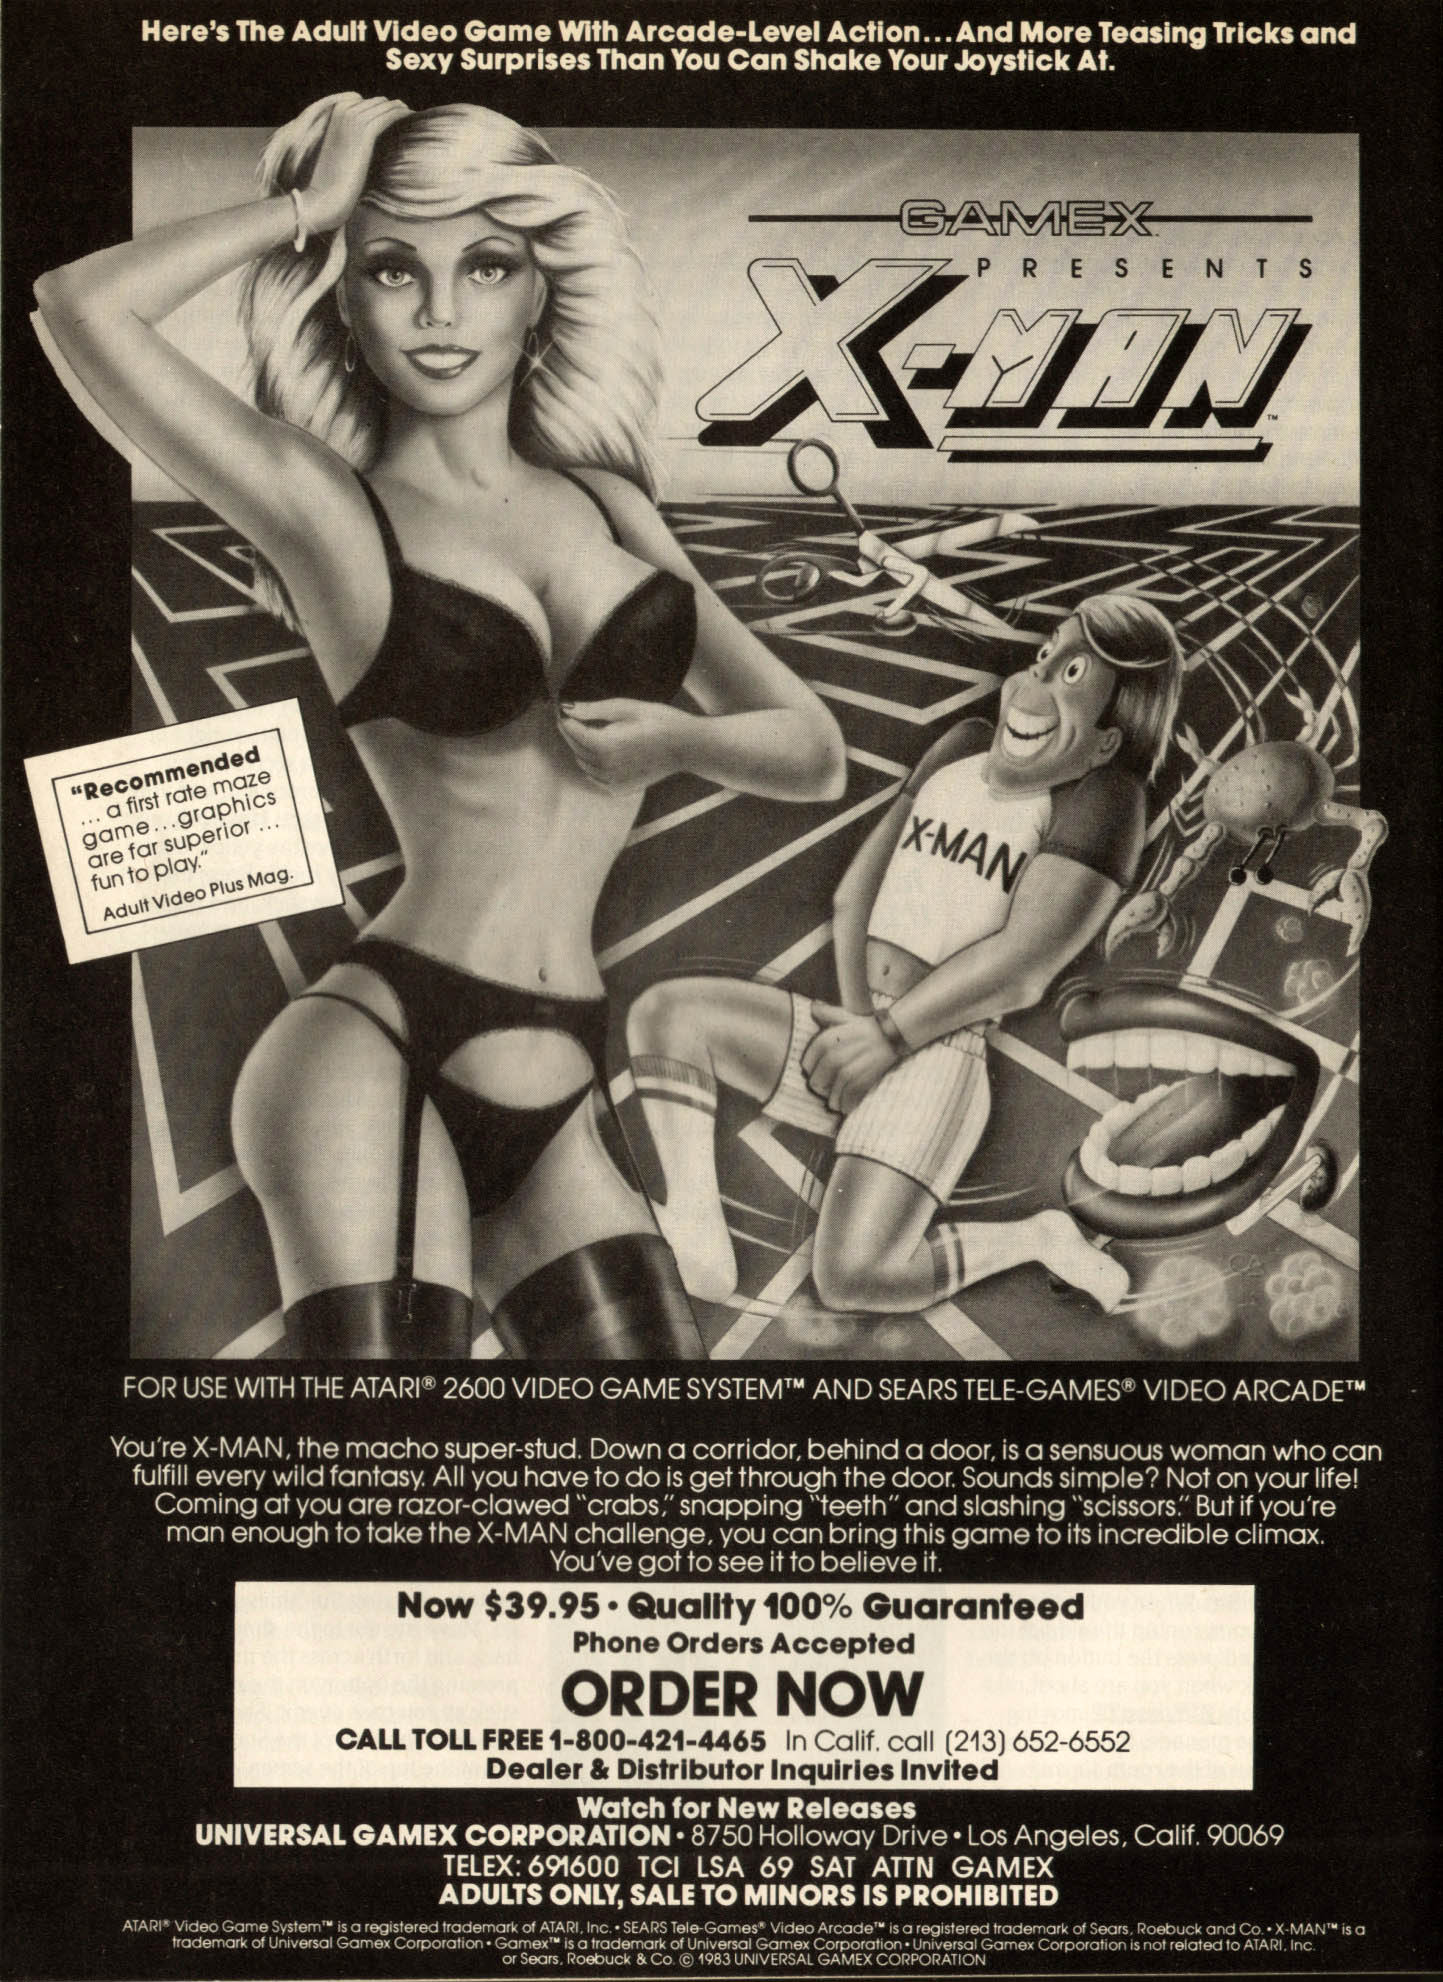 These Old Video Game Ads Are Probably Why We're All Perverts